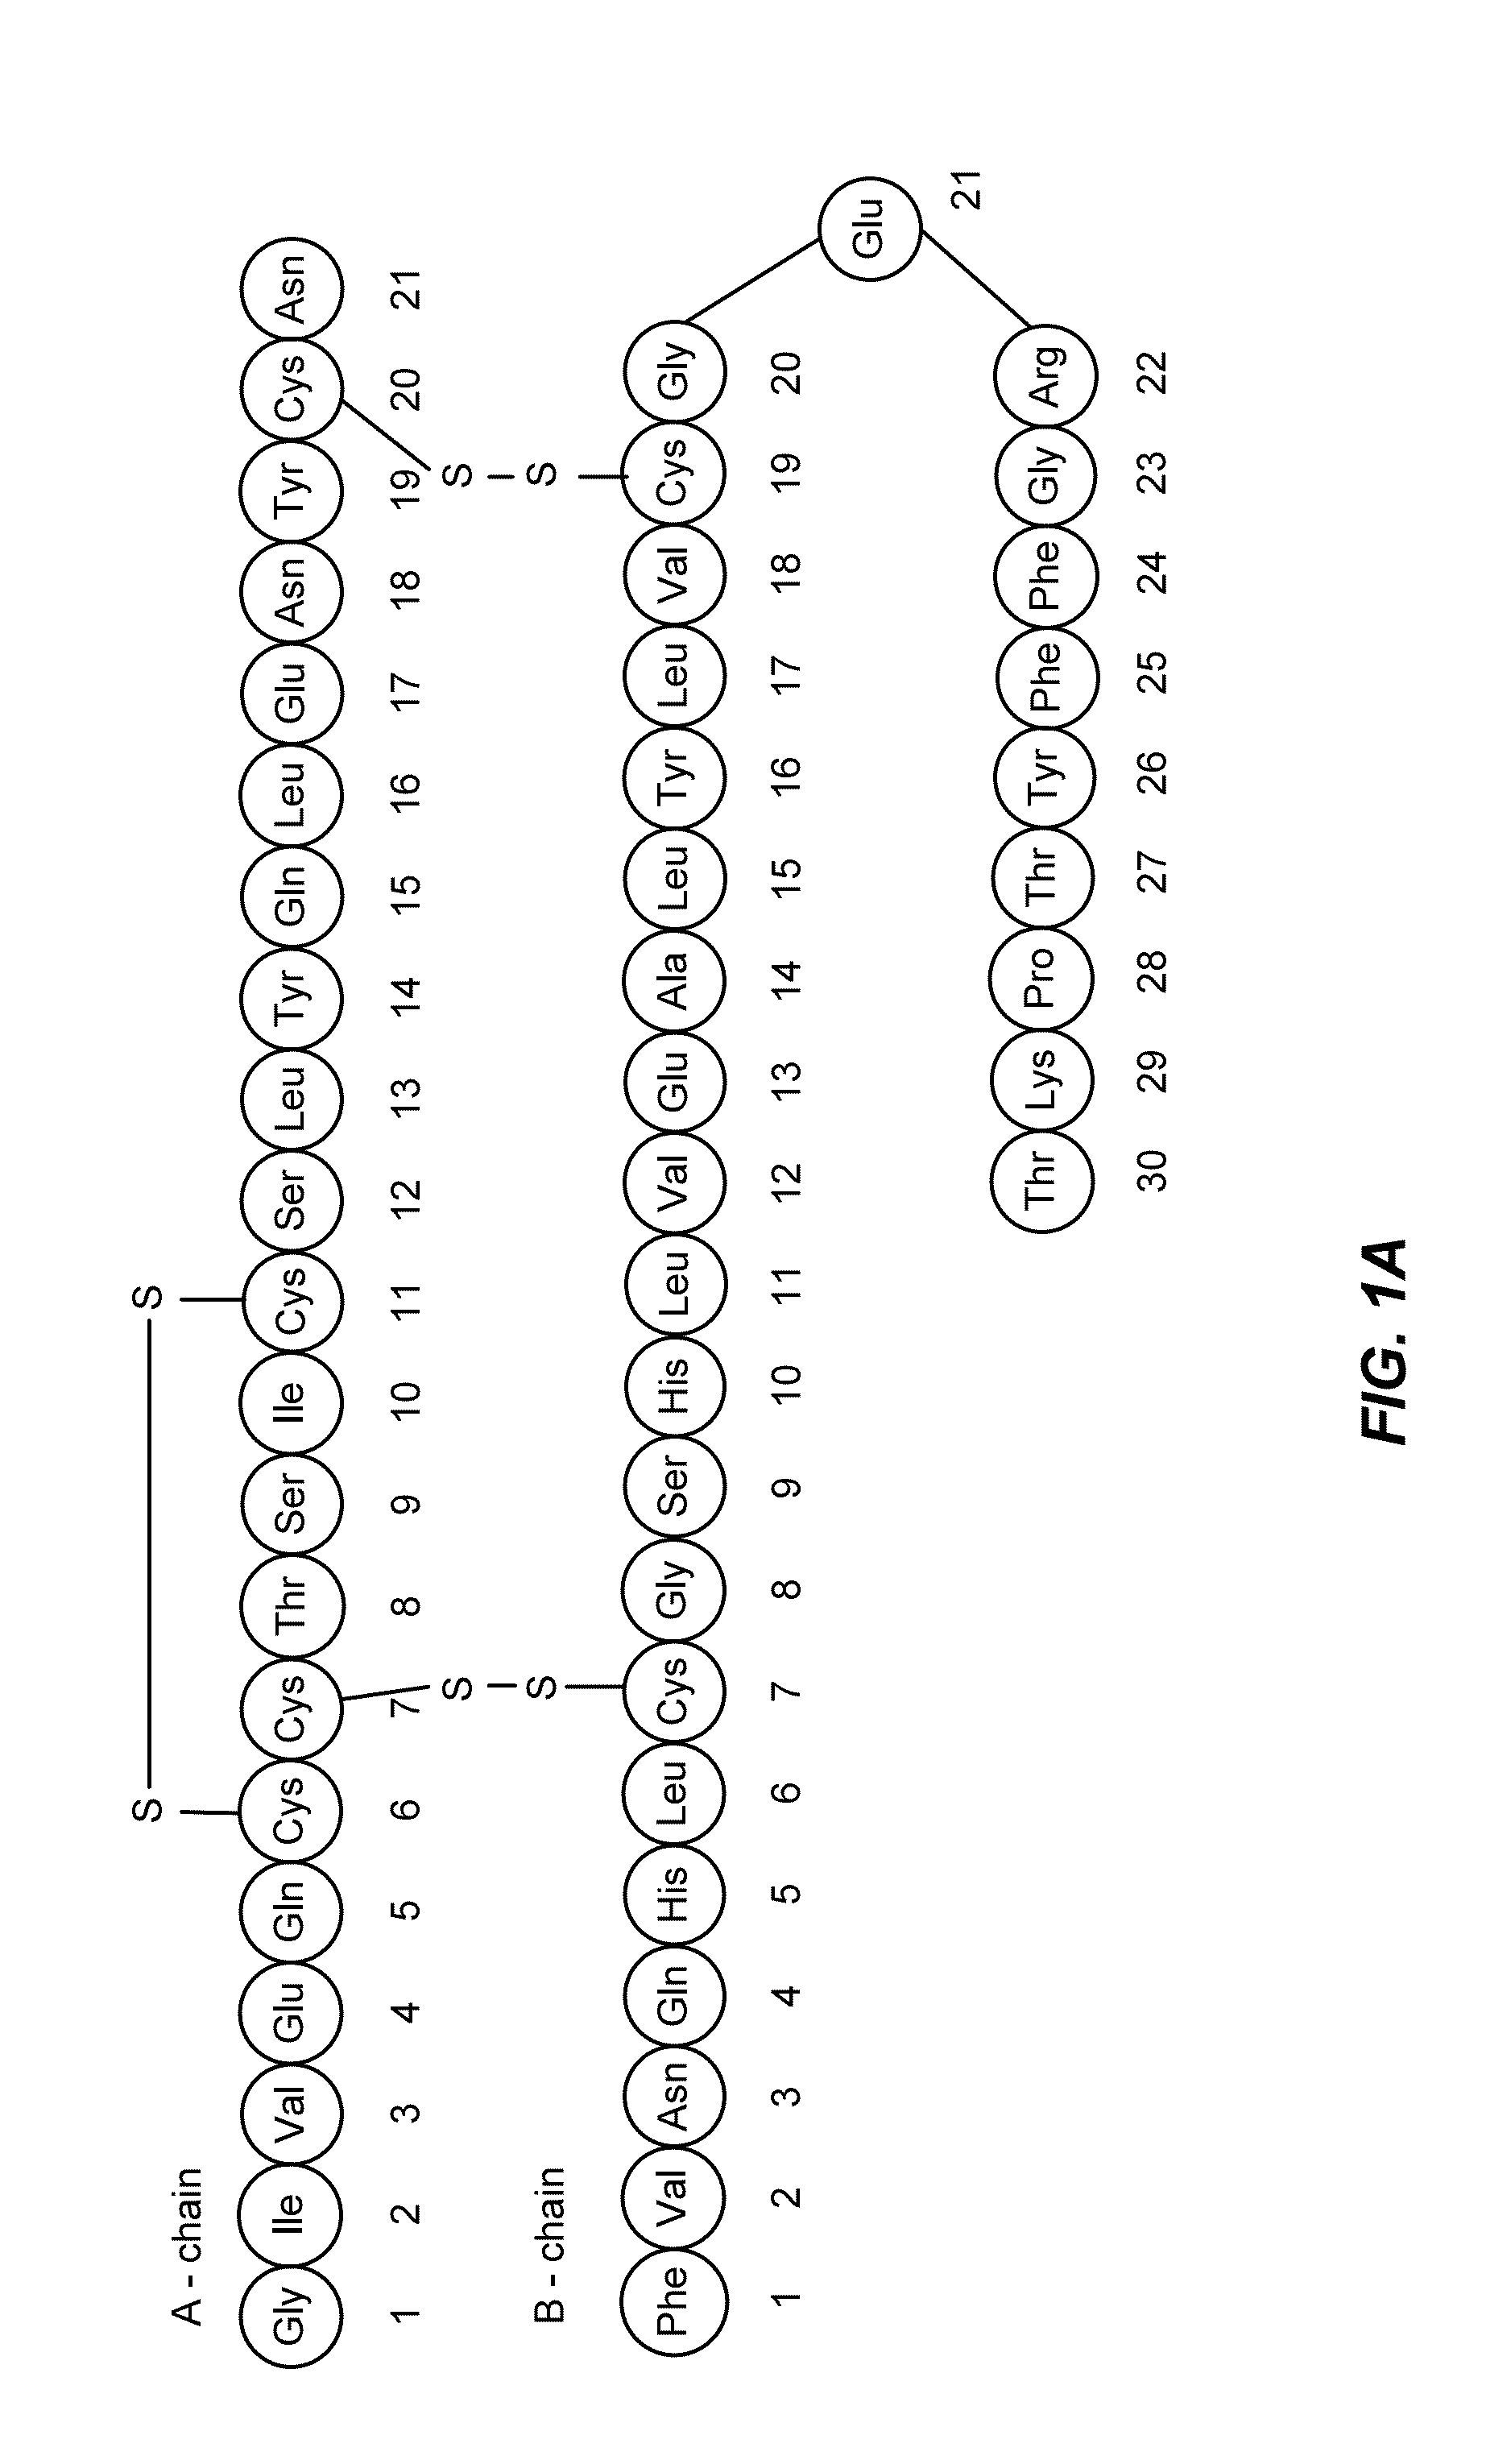 Chemically and thermodynamically stable insulin analogues and improved methods for their production